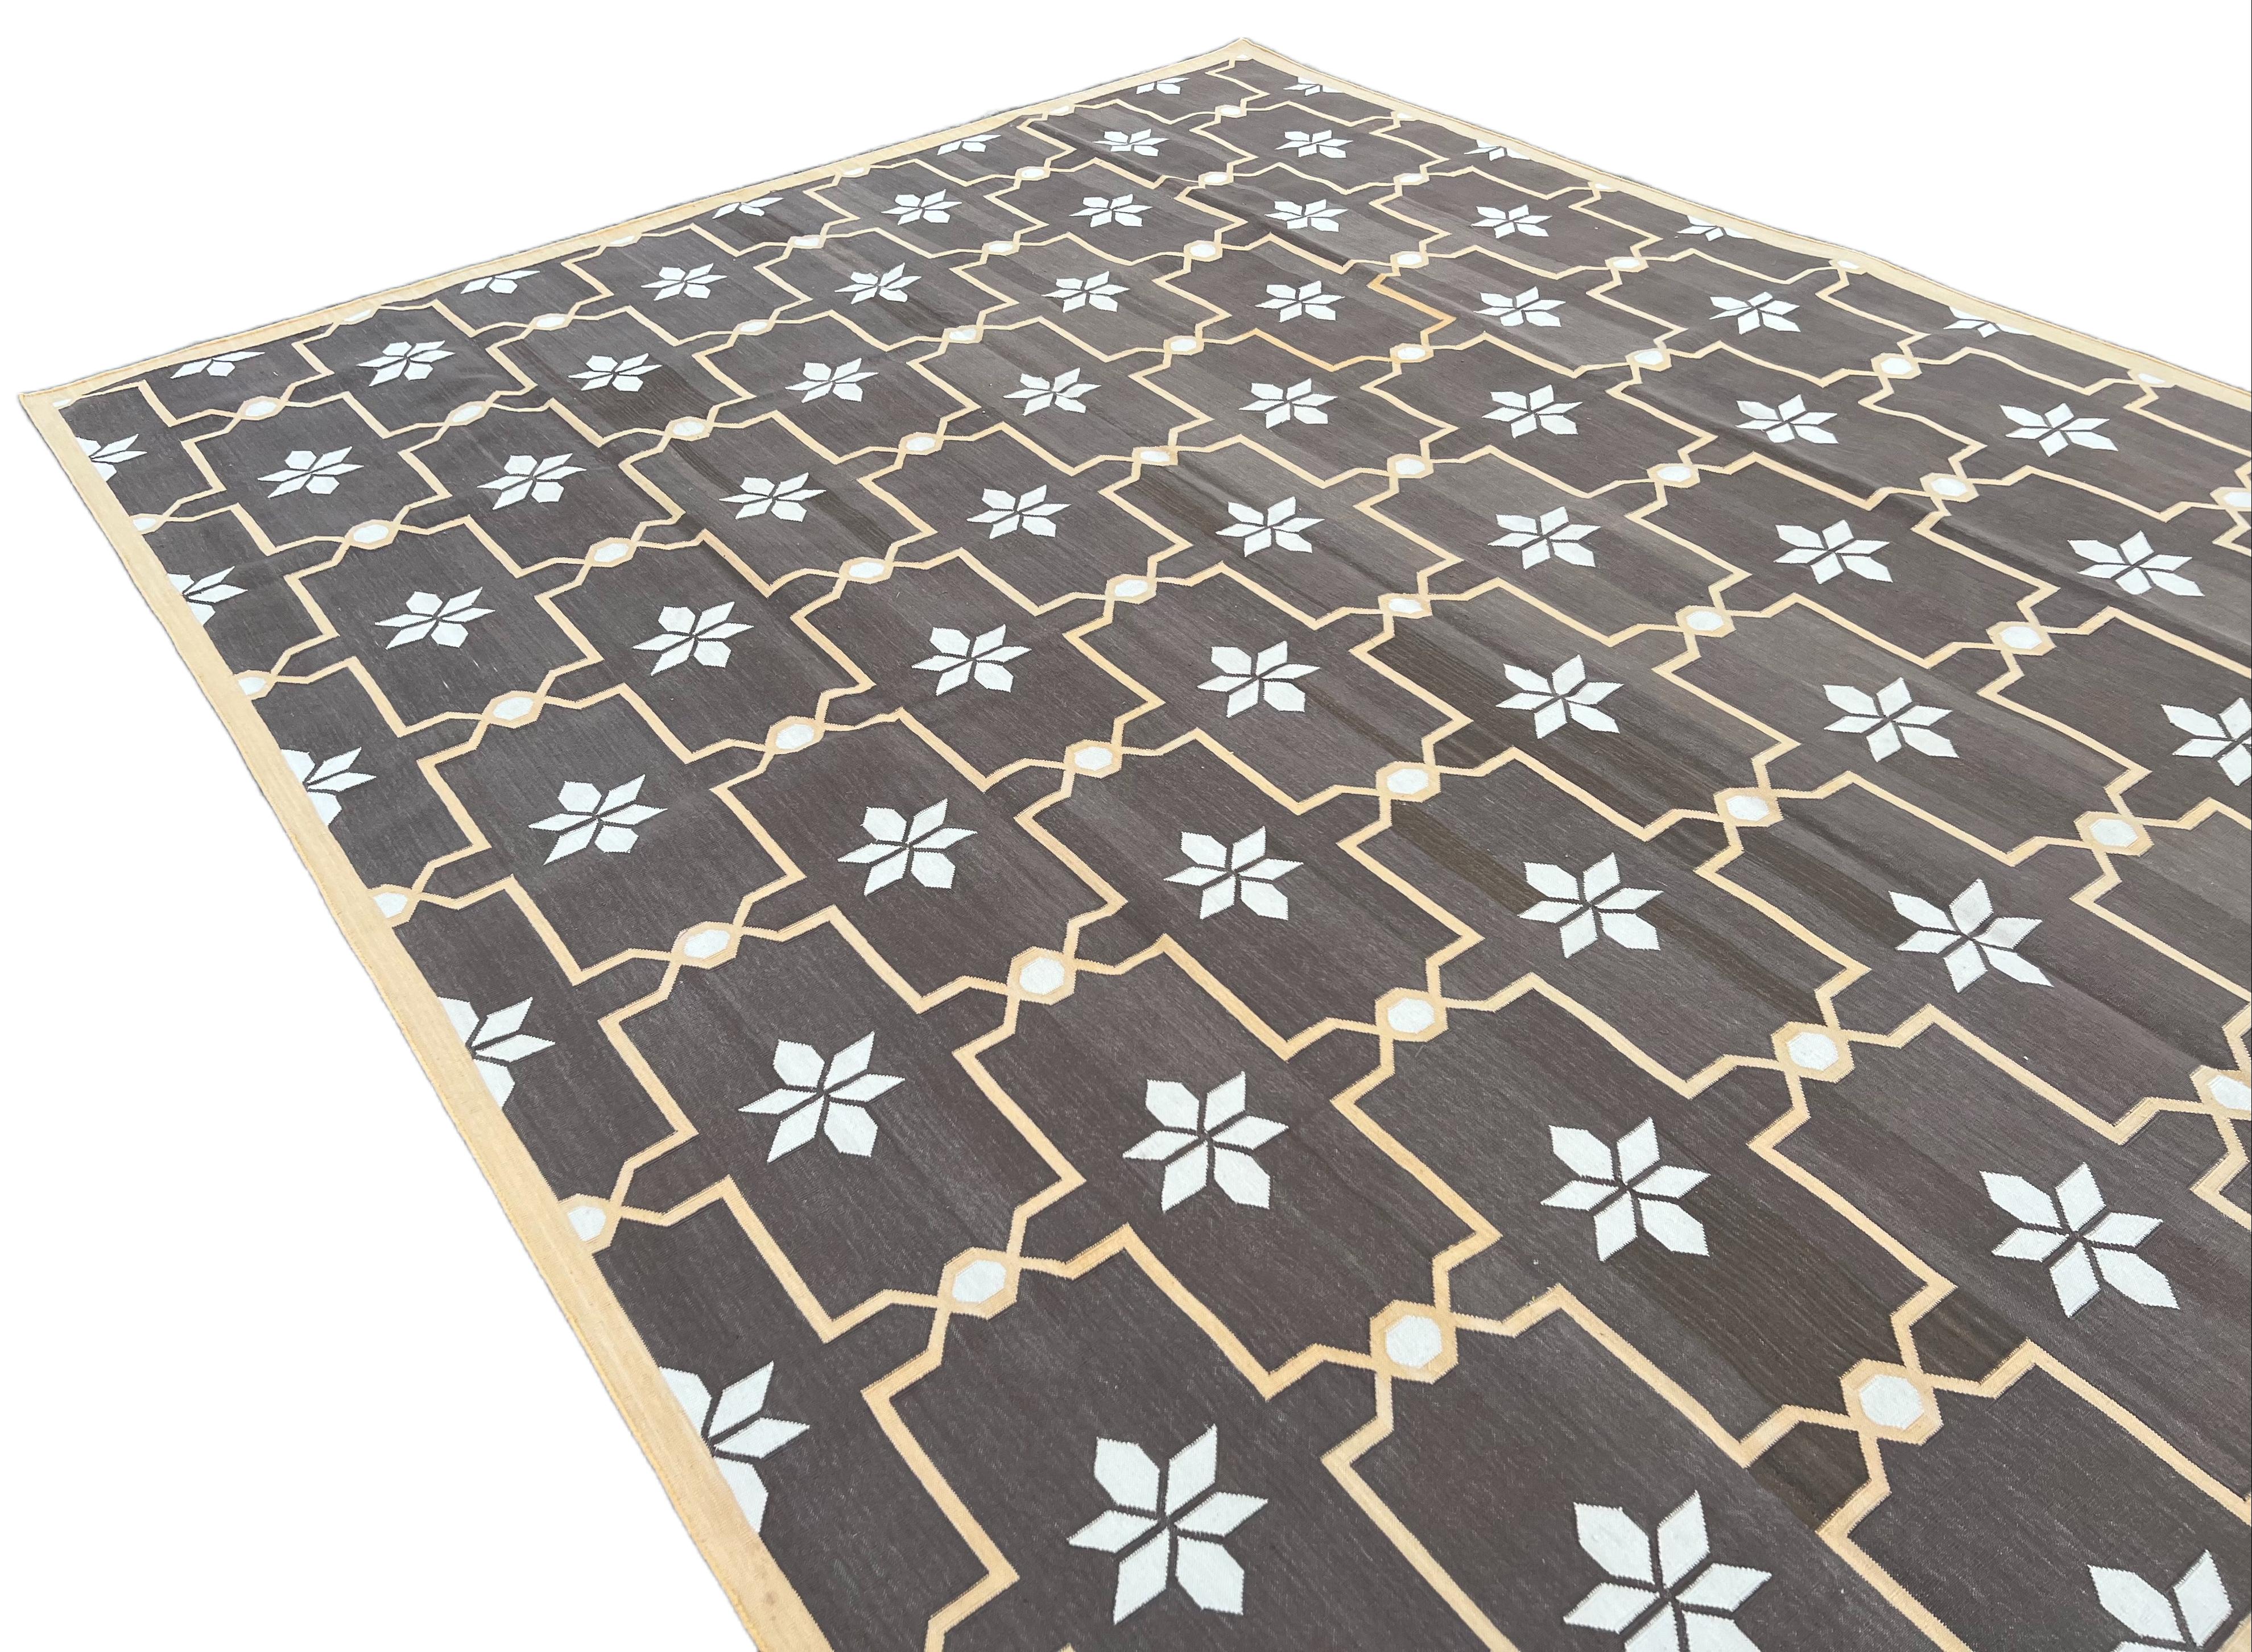 Hand-Woven Handmade Cotton Area Flat Weave Rug, Brown And Cream Flower Pattern Dhurrie Rug For Sale